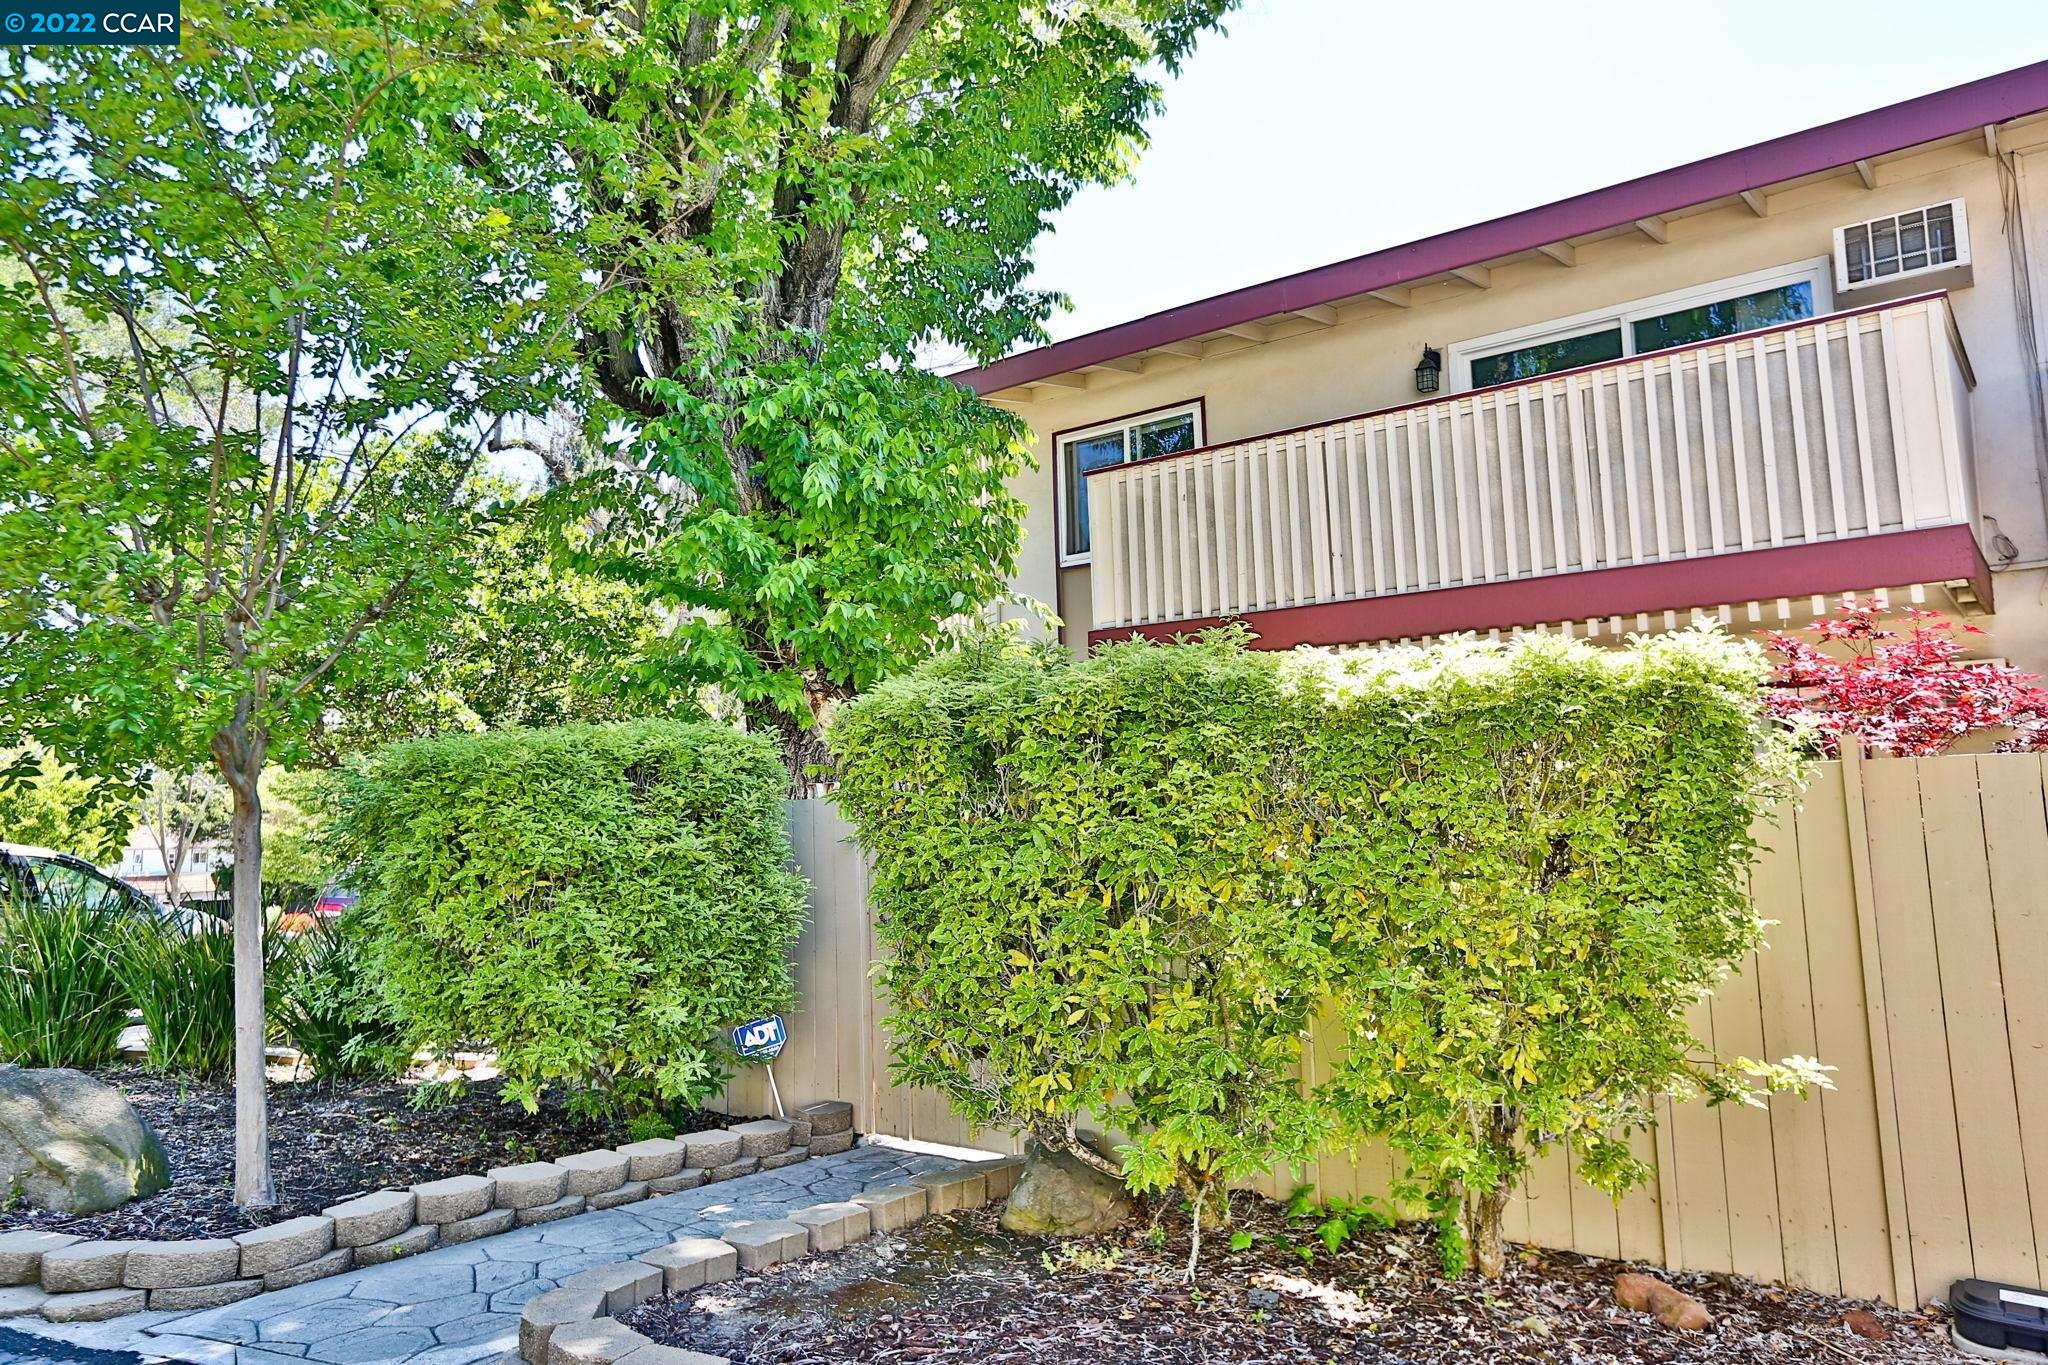 Renovated 2 bed/1 bath end-unit on the borders of Walnut Creek & Lafayette with views of Mt. Diablo.  Remodeled kitchen with designer cabinets, quartz counters & stainless appliances. New bath, dual-pane windows, carpeting, ceramic & laminate flooring.  Wall A/C unit has been replaced with an efficient split AC/heat pump system.  Freshly painted and much more ...  Walk to shopping & dining.  Easy access to I-680, Hwy 24 & BART.  Close to parks, open space, walking & biking trails.